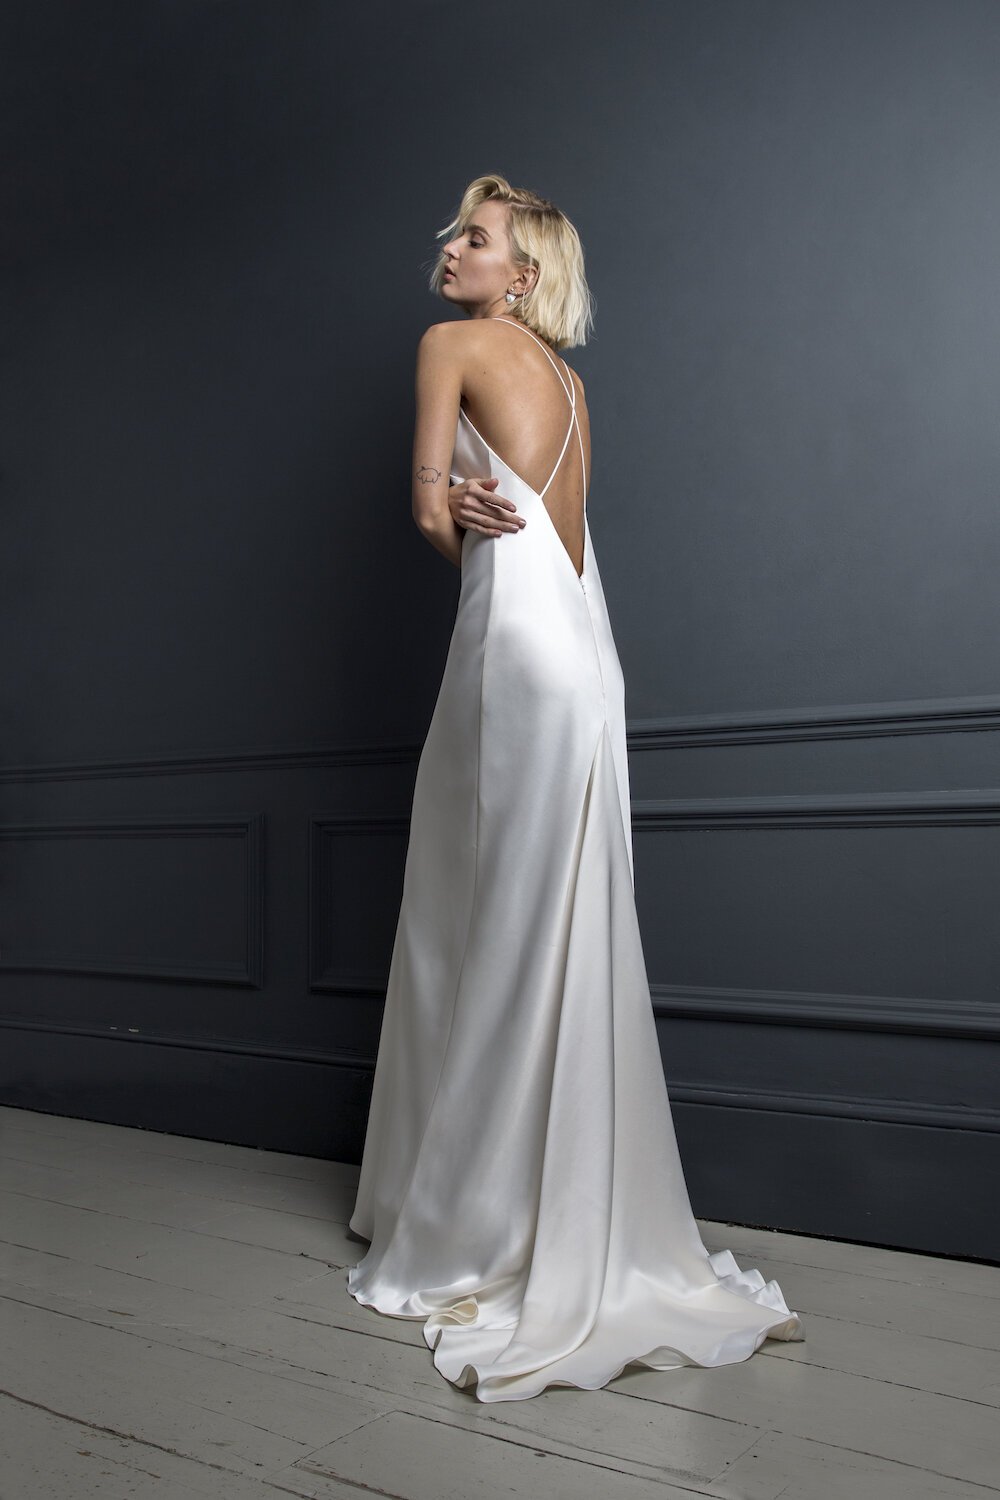 Looking for a dupe. The Max dress by Hayley Paige. It's so unique and  haven't been able to find one like it. : r/weddingdress